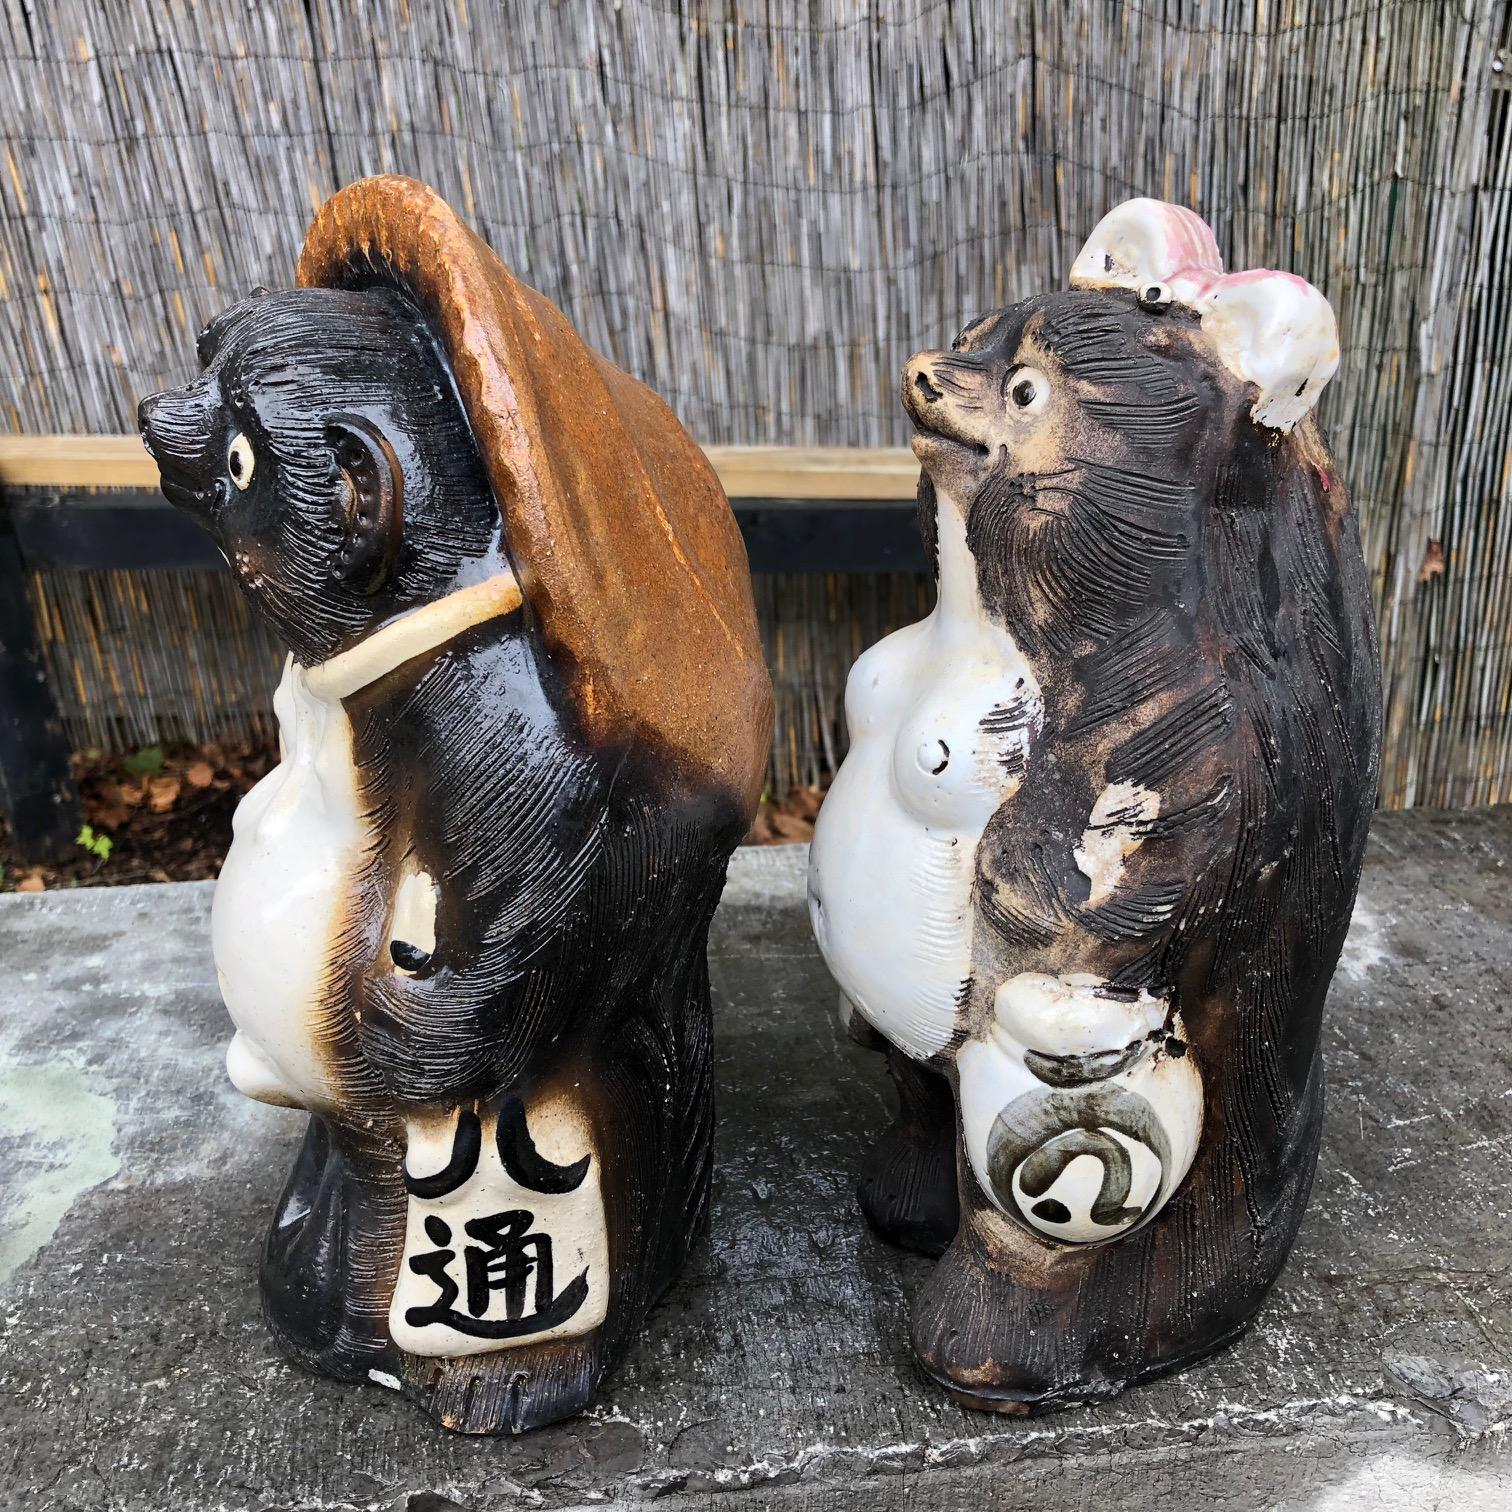 Matching Pair Charming Signed Sculptures Ready to take your Sake Order

An older pair of fun loving Him and Her handmade and hand glazed and big bellied Folk art Hero Tanukis- raccoon dog party animals from Japan.

Brandishing their sake order